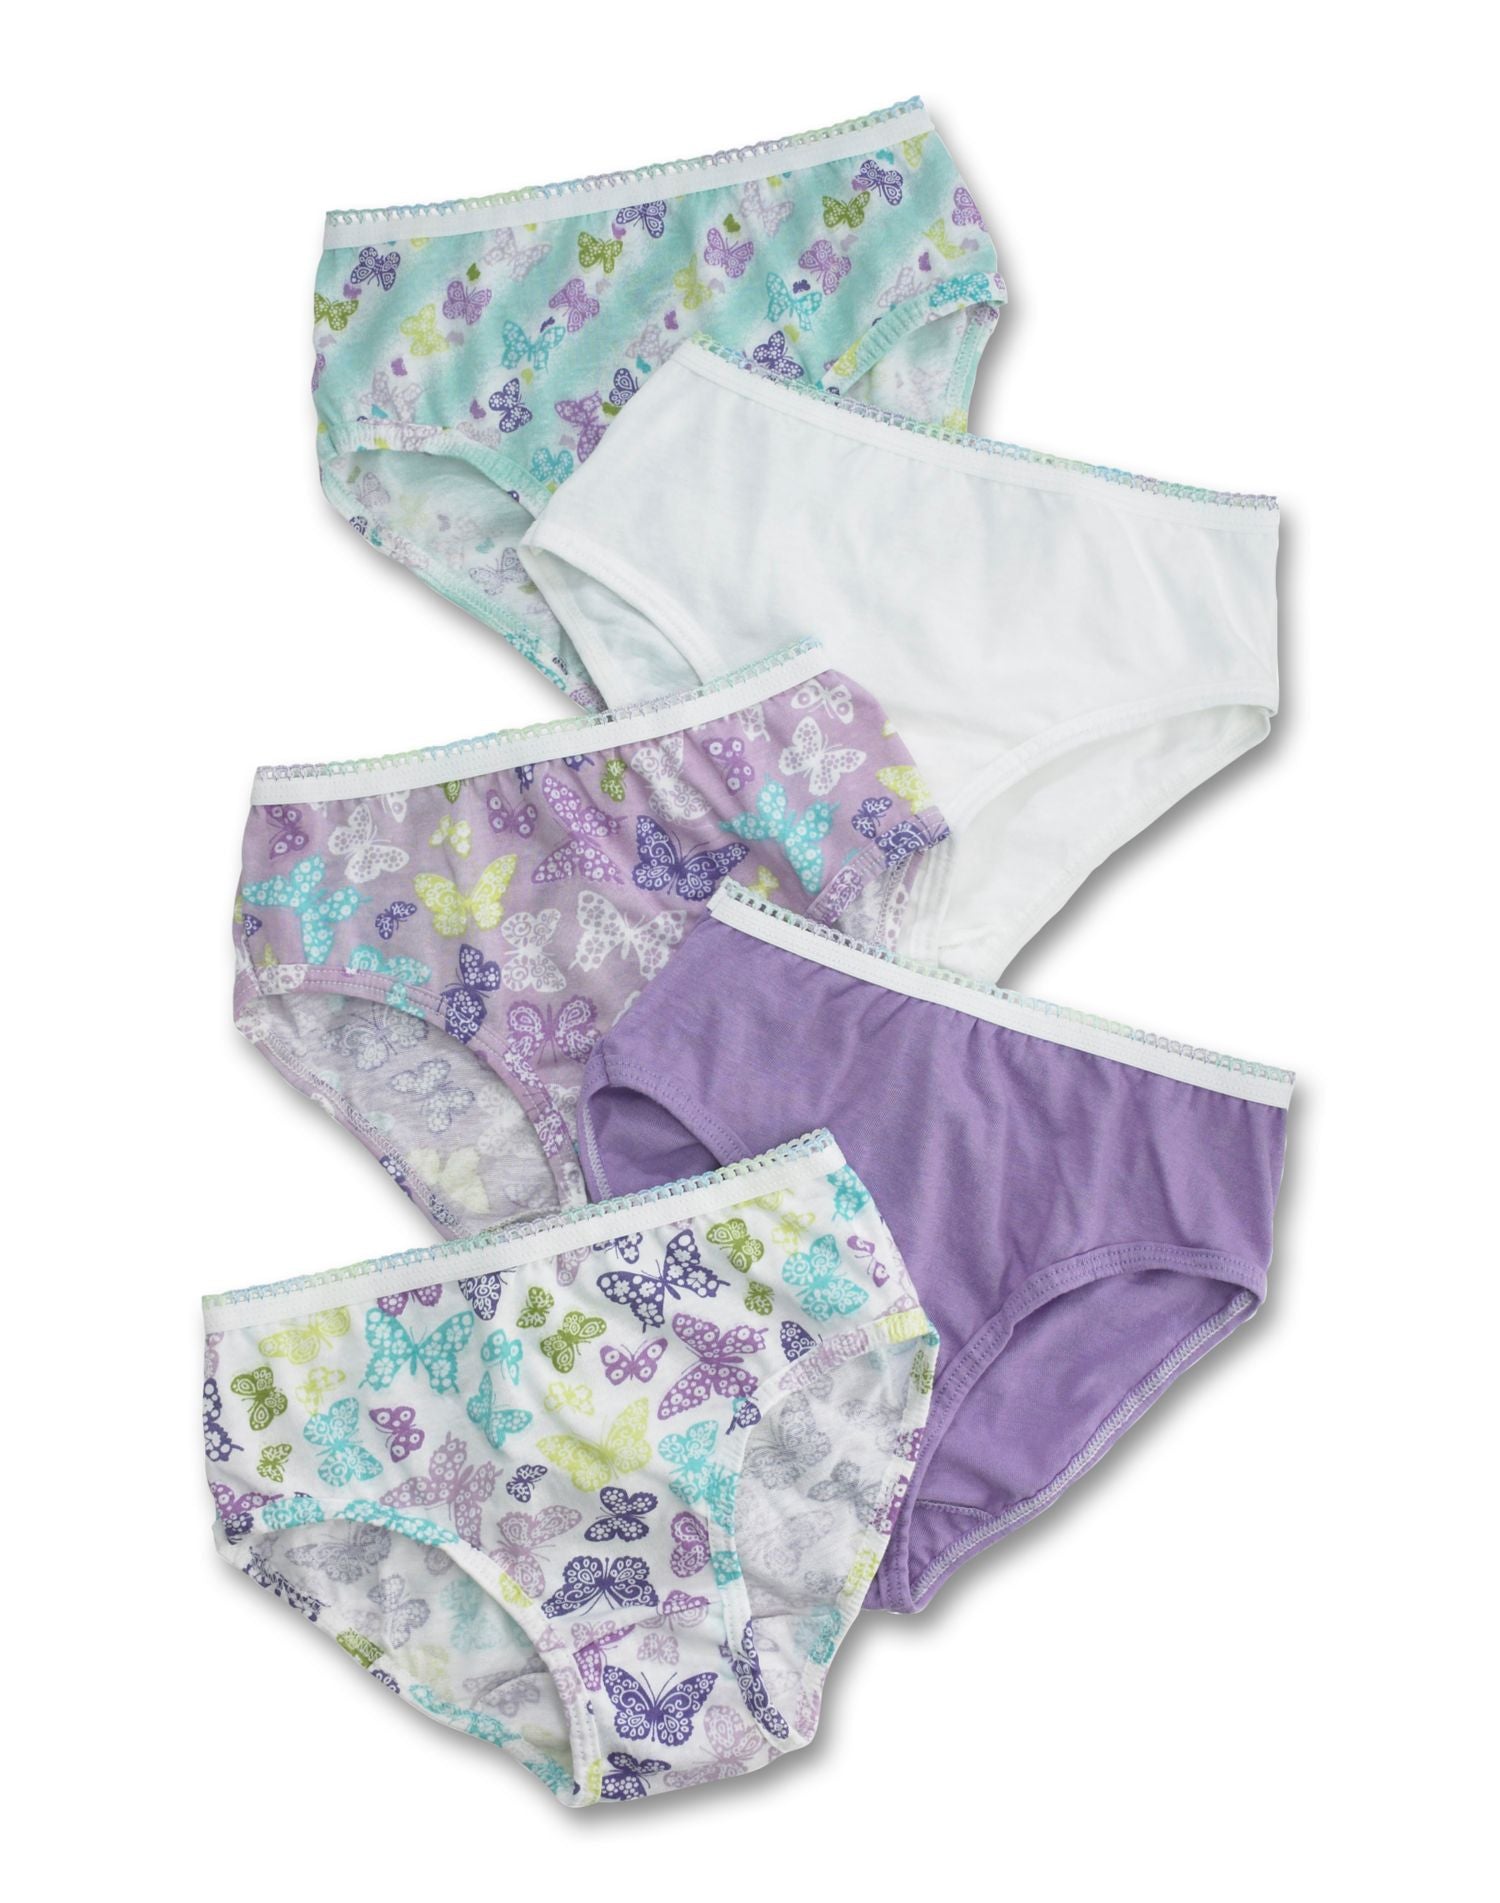 Hanes Classic Girls' No Ride Up Cotton Low Rise Briefs 5 Pack